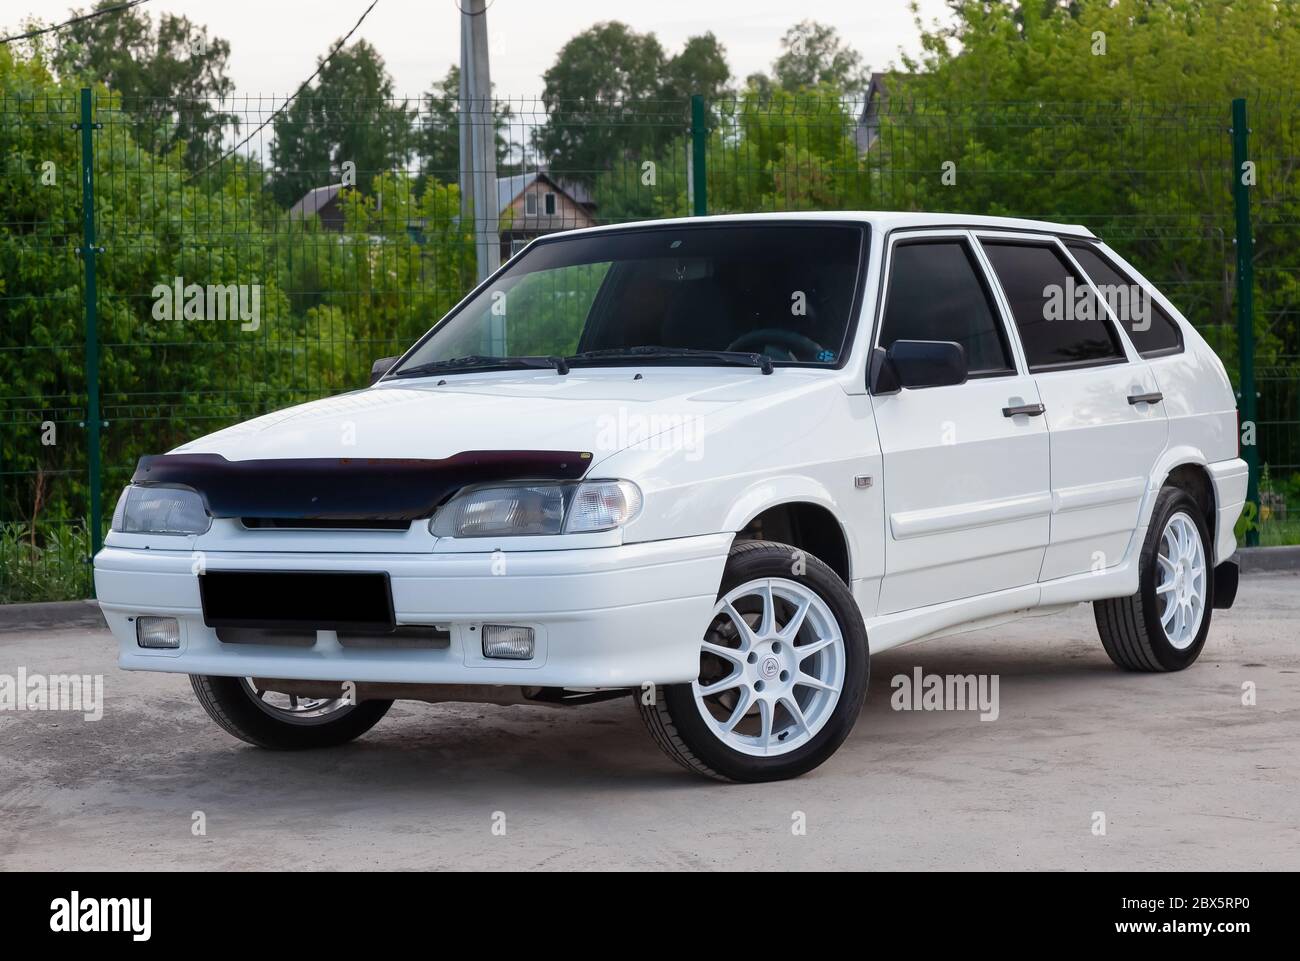 Novosibirsk, Russia - 05.20.2020: The new domestic Russian car brand Lada automobile industry VAZ model 2114 of a modern series of white color and dri Stock Photo